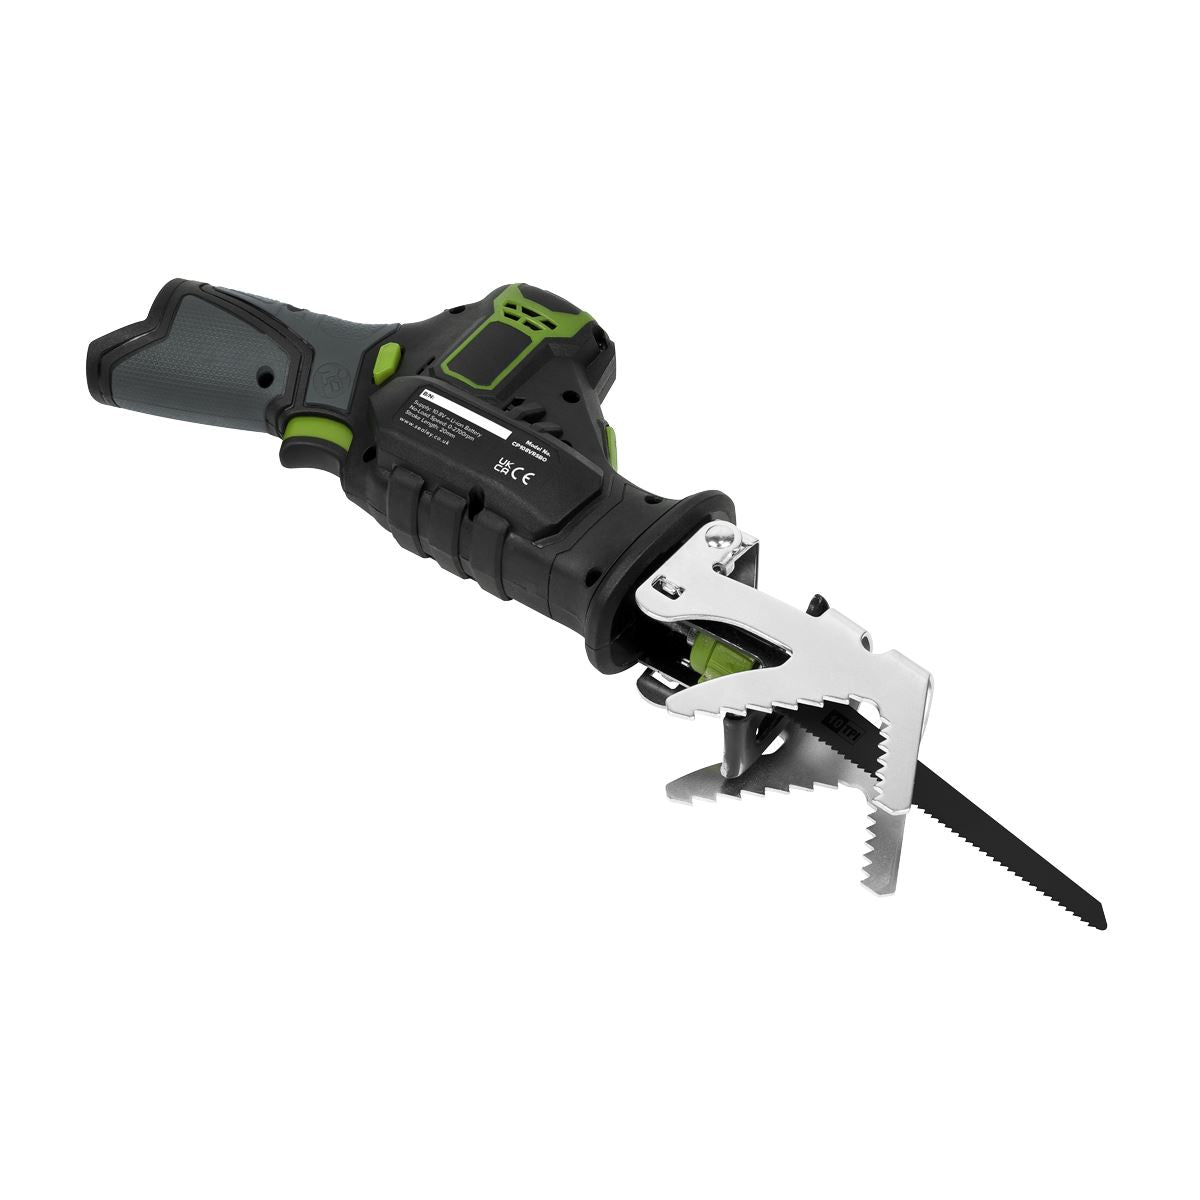 Sealey Cordless Reciprocating Saw 10.8V SV10.8 Series - Body Only